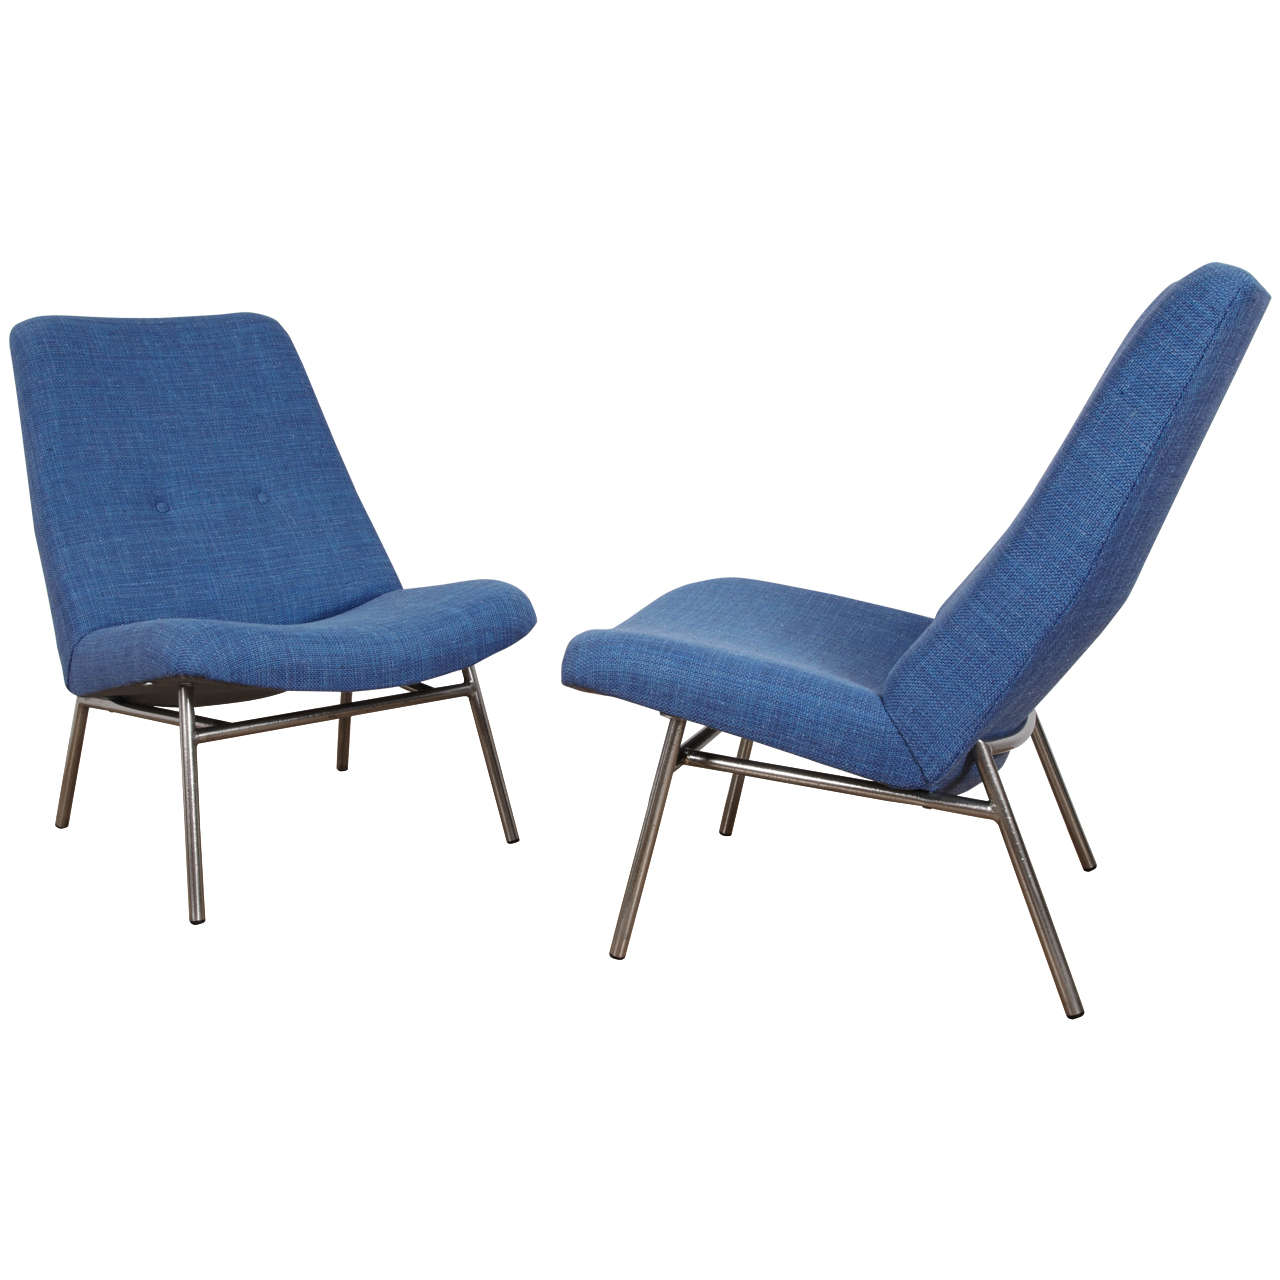 Pair of armchairs SK660 by Pierre Guariche - Steiner edition For Sale